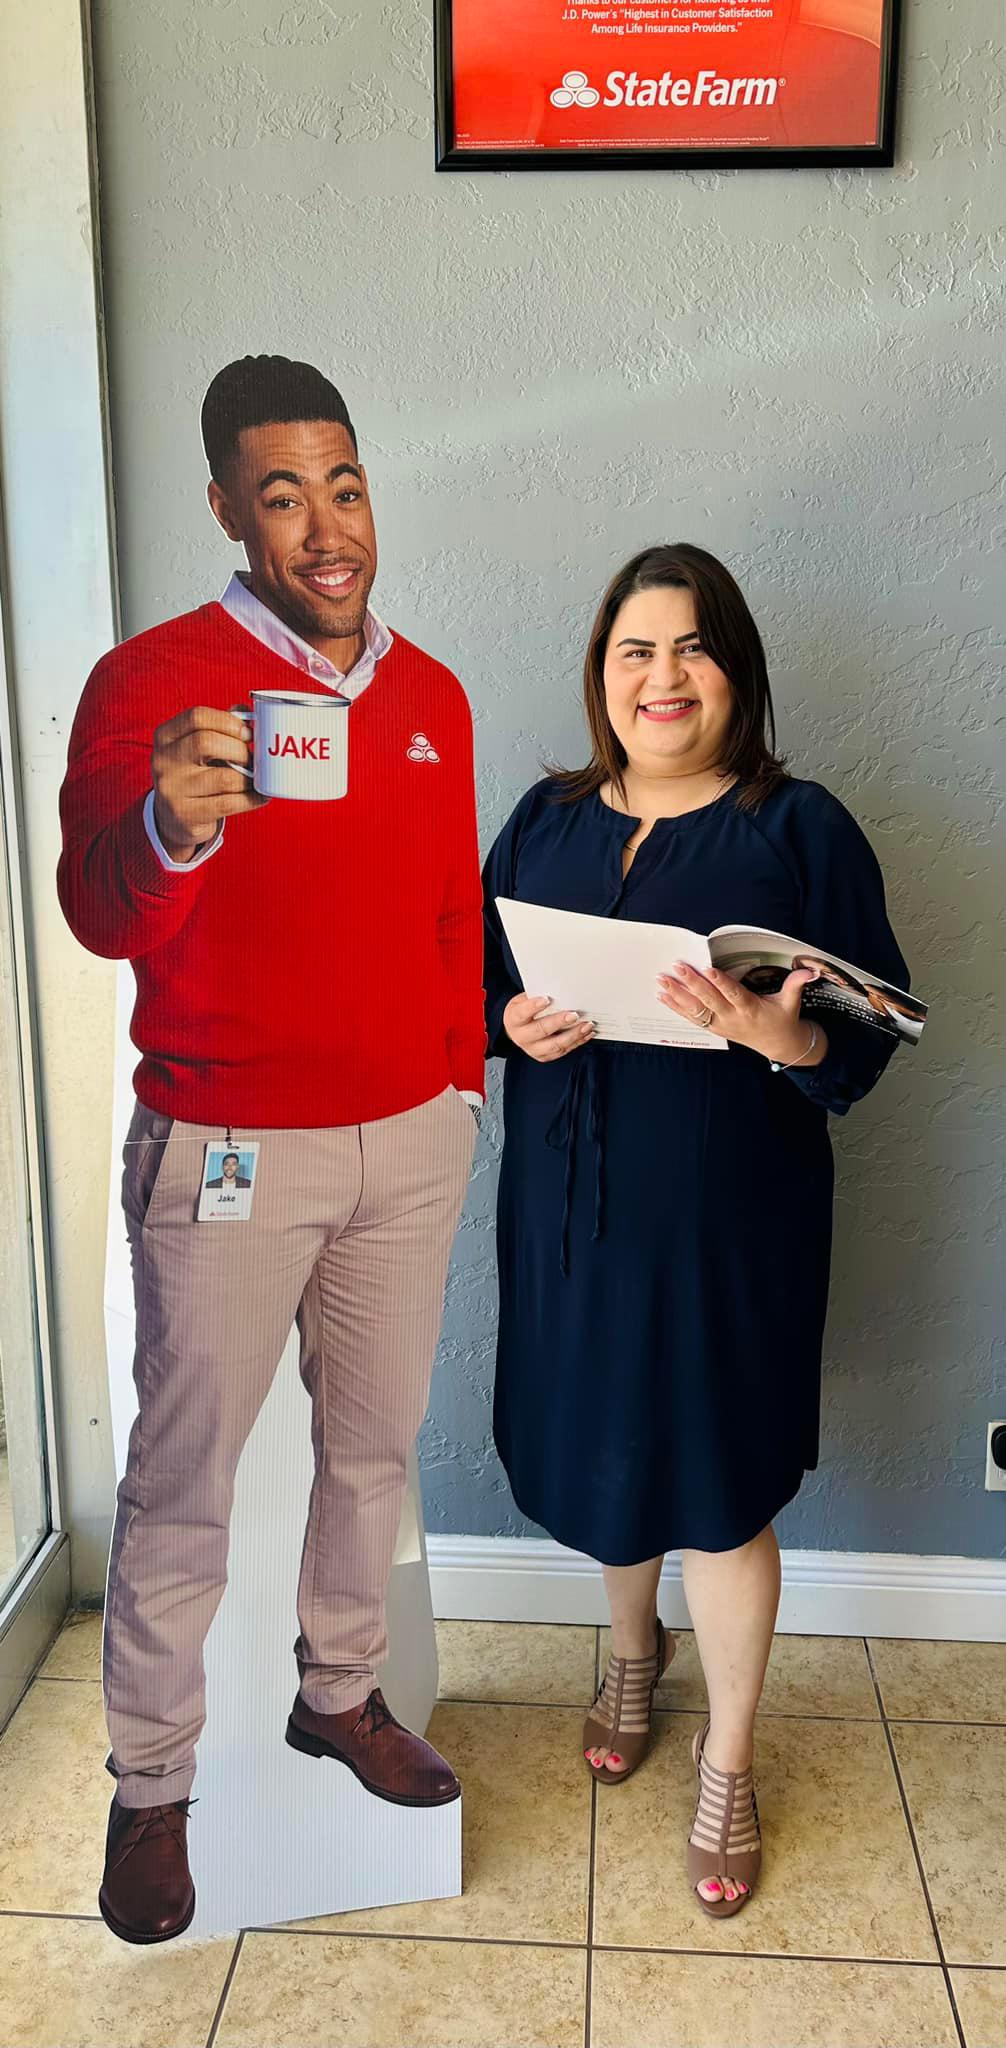 Have you been thinking about Life Insurance?

If you are not sure where to start, call us! ☎️
We wou Isabel Degollado - State Farm Insurance Agent San Antonio (210)438-5826